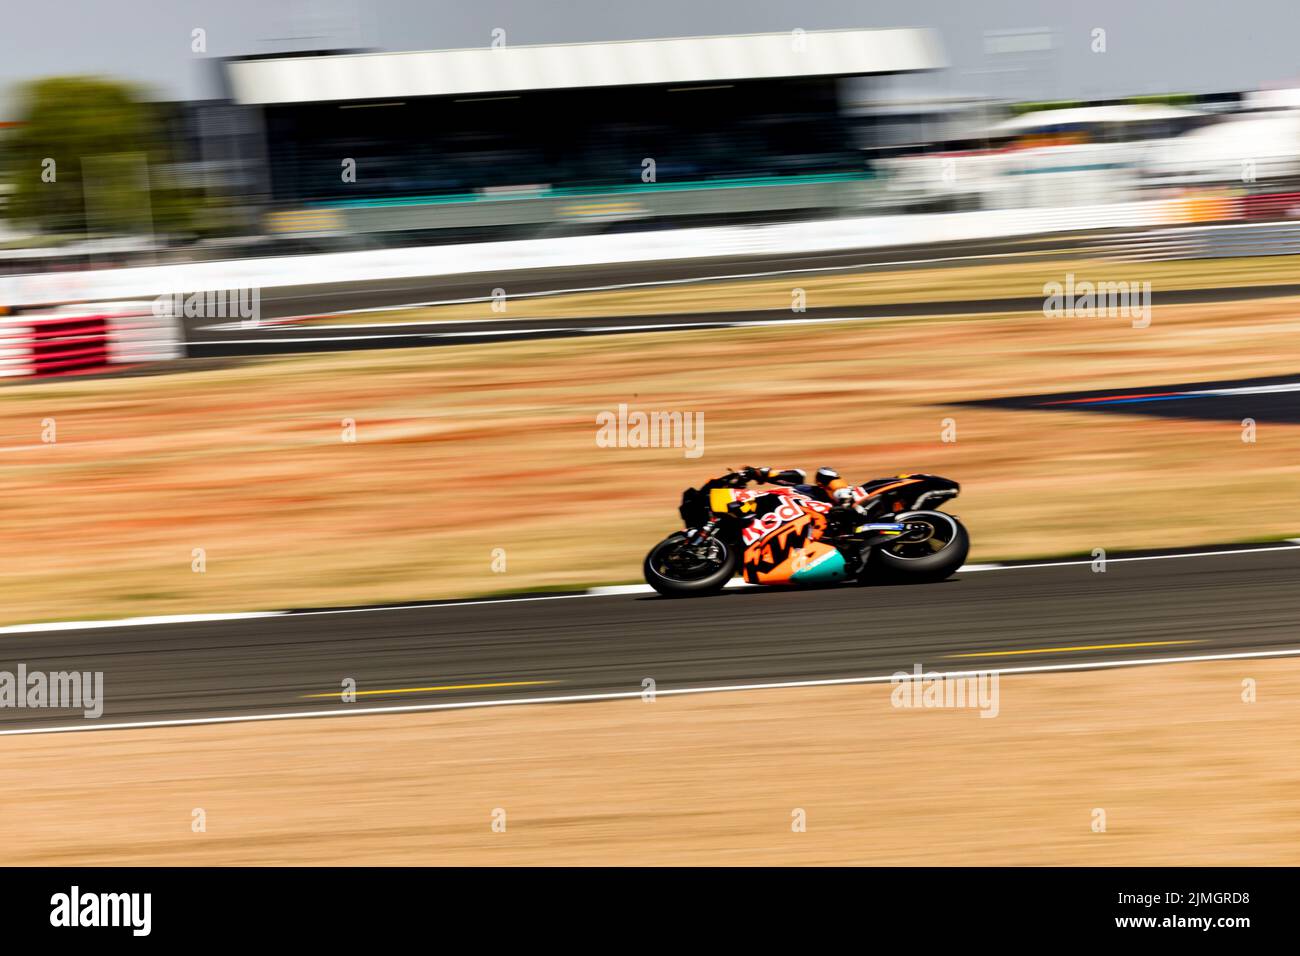 6th August 2022; Silverstone Circuit, Silverstone, Northamptonshire, England: British MotoGP Grand Prix, Qualifying: Number 88 Red Bull KTM Factory Racing bike ridden by Miguel Oliveira during qualifying at the British MotoGP Stock Photo